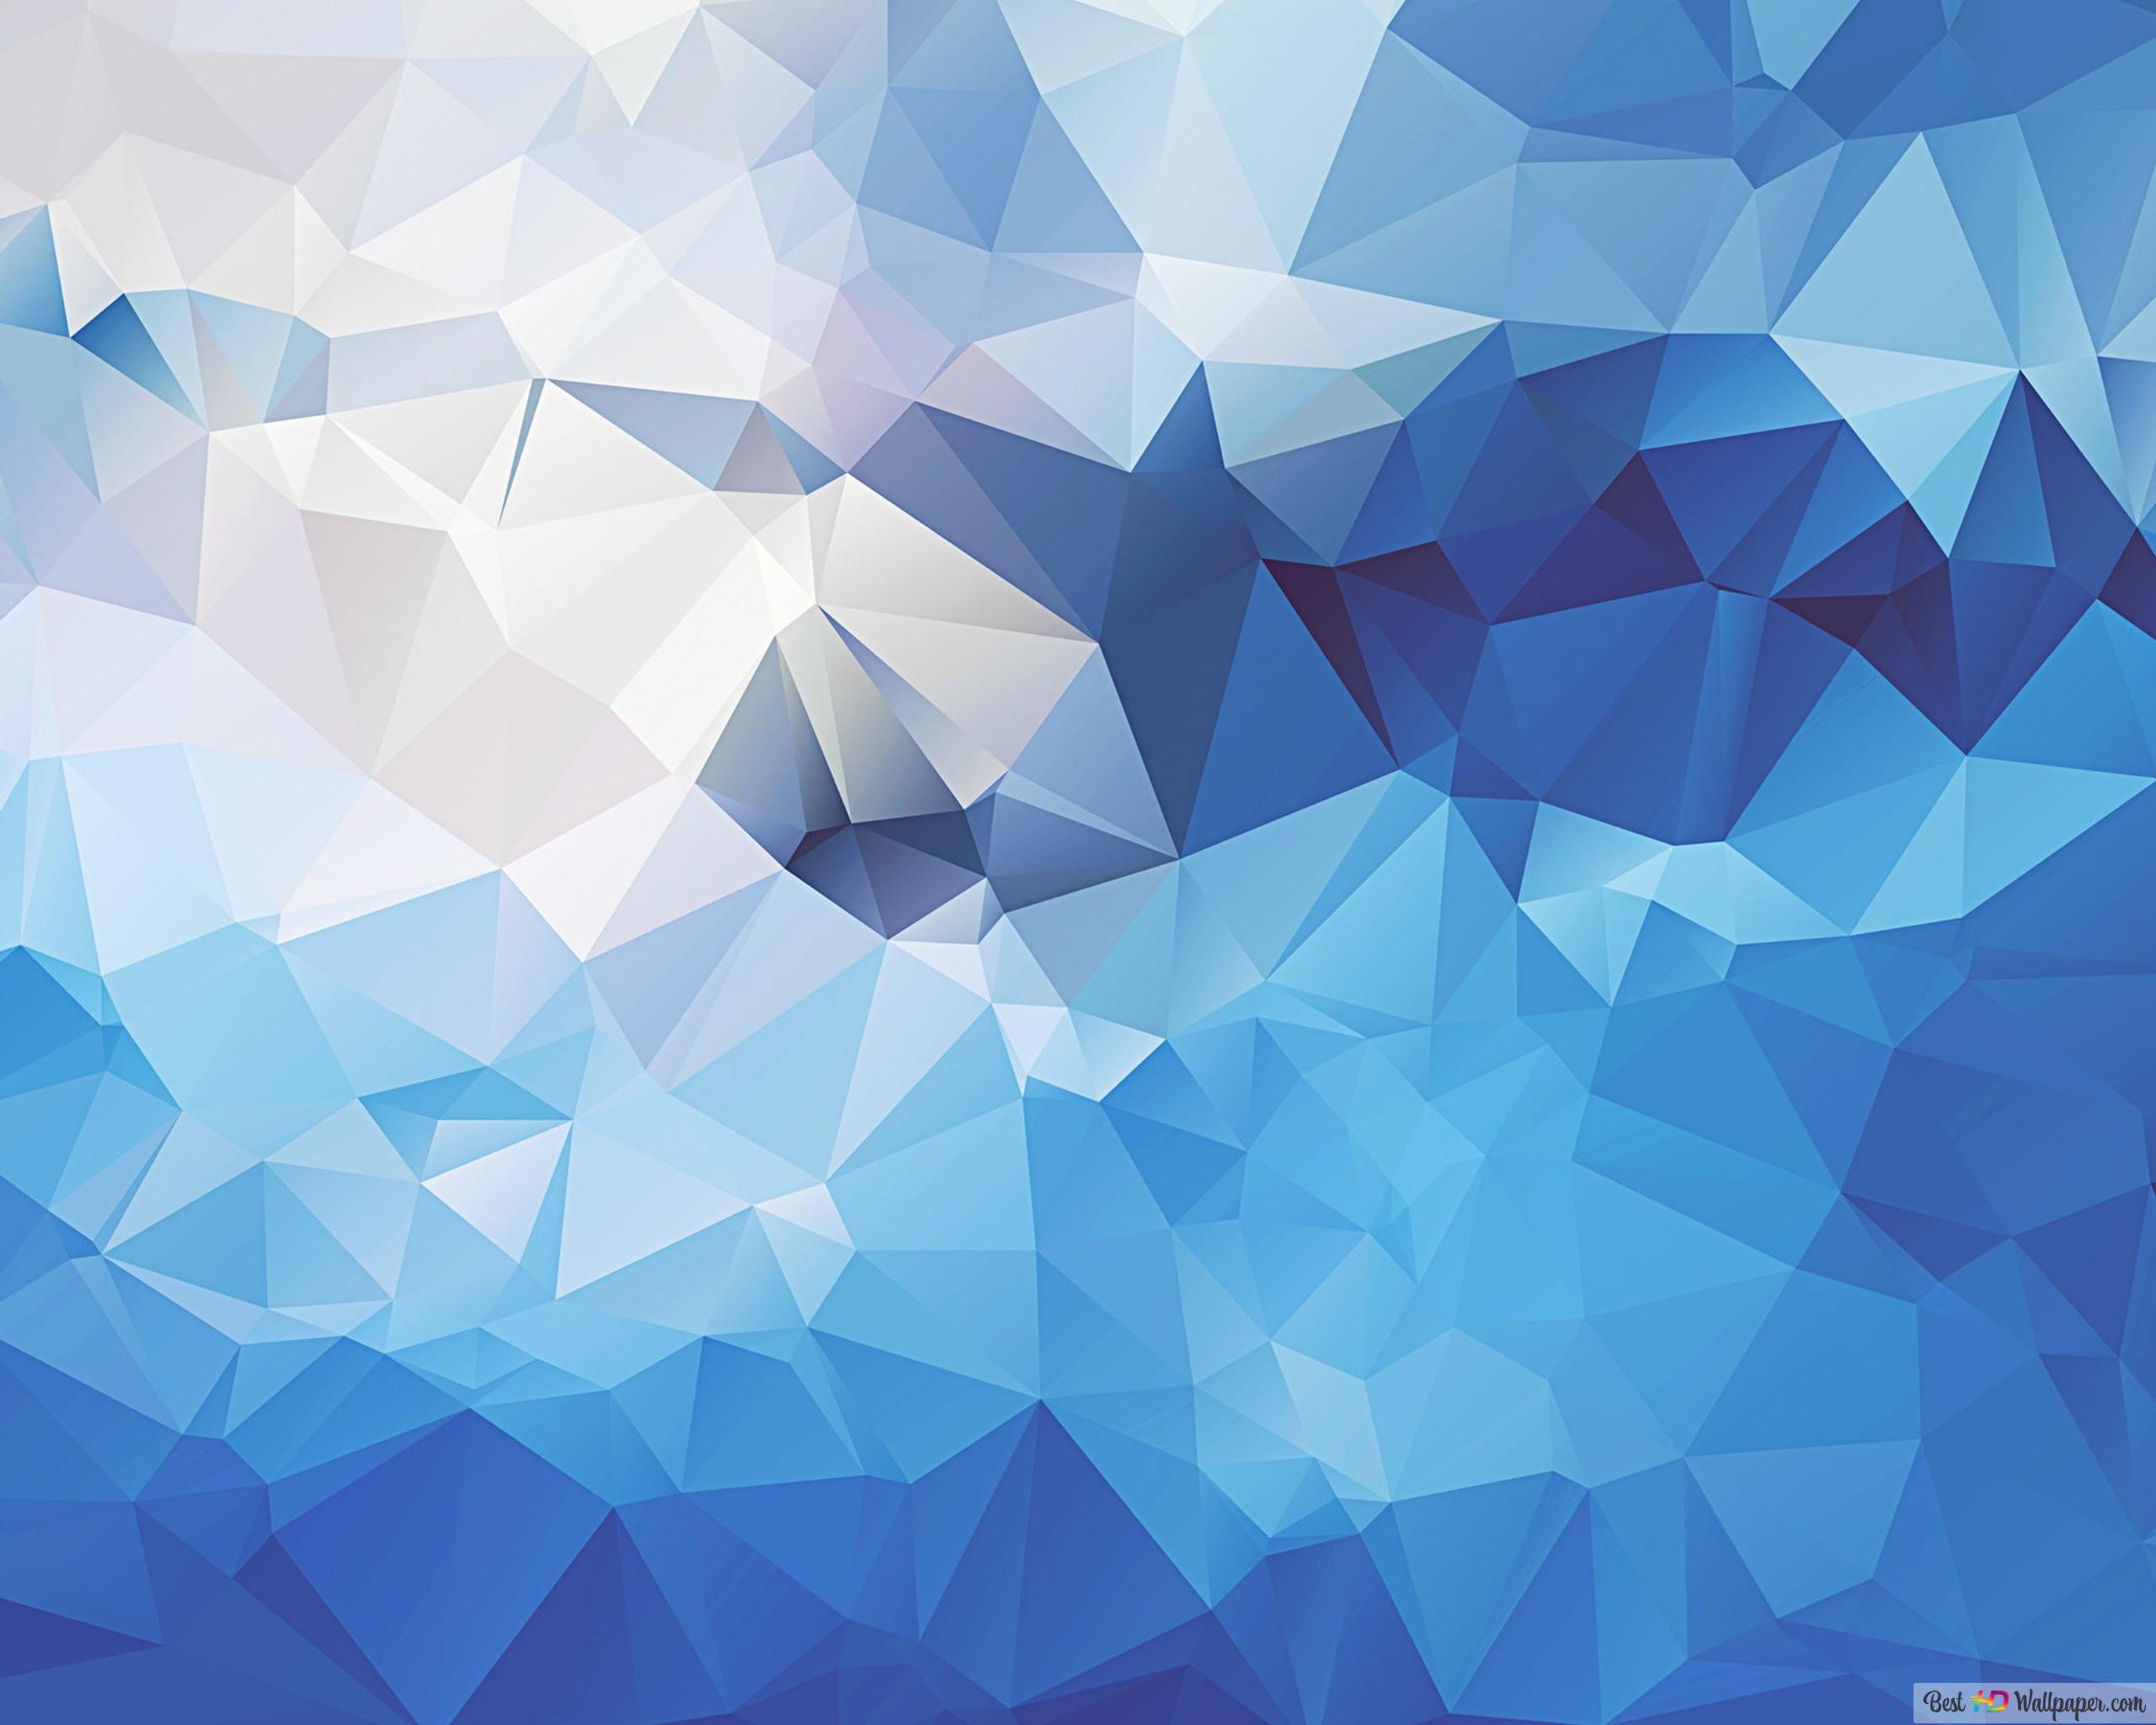 Blue teal and white geometric artwork triangles k wallpaper download